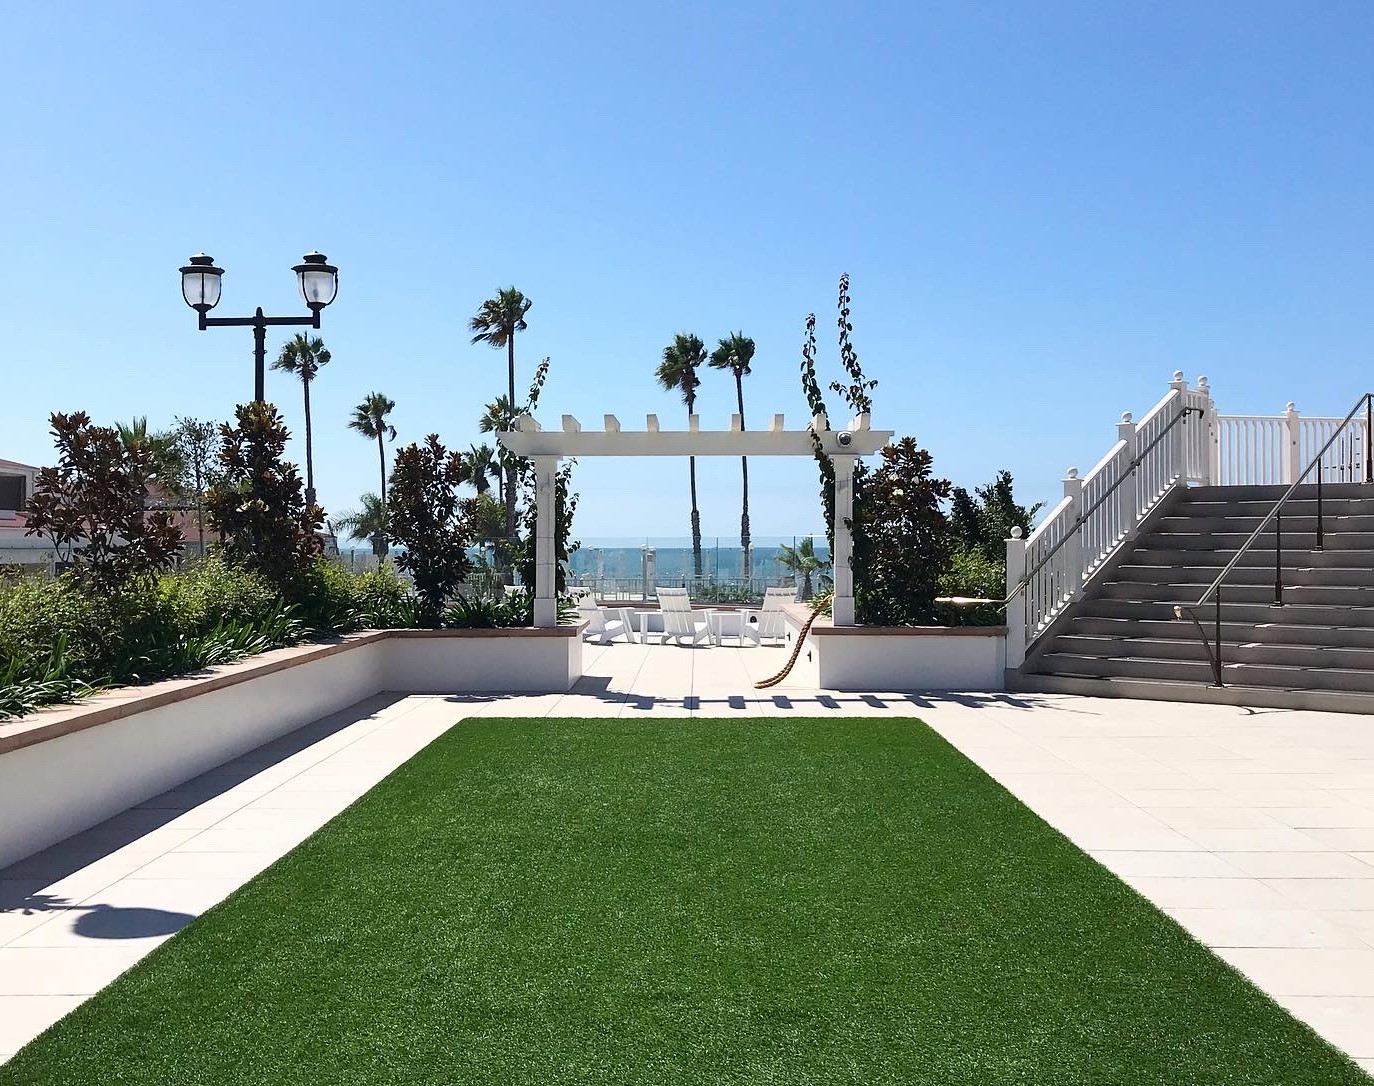 A photograph taken in Coronado, CA, of an empty plaza with green astro turf, lounge chairs, and ocean beach.